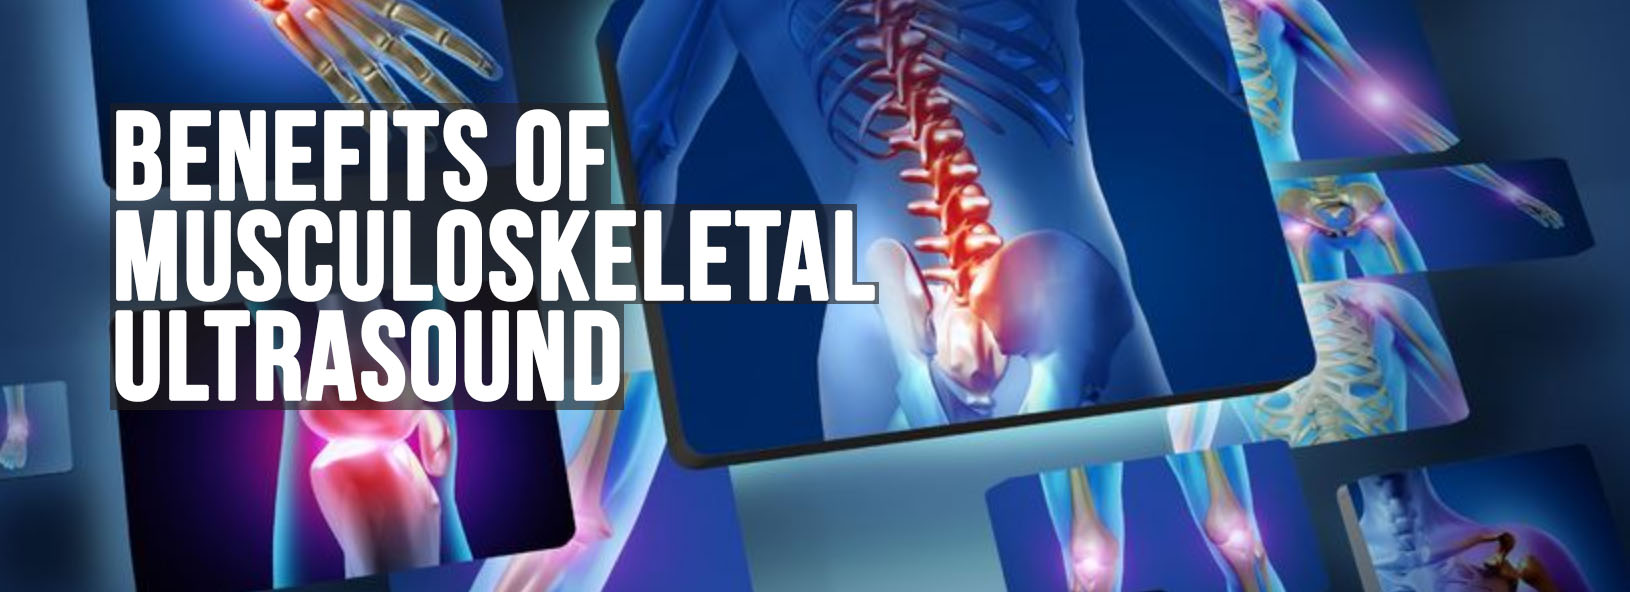 What are the Benefits of Musculoskeletal Ultrasound